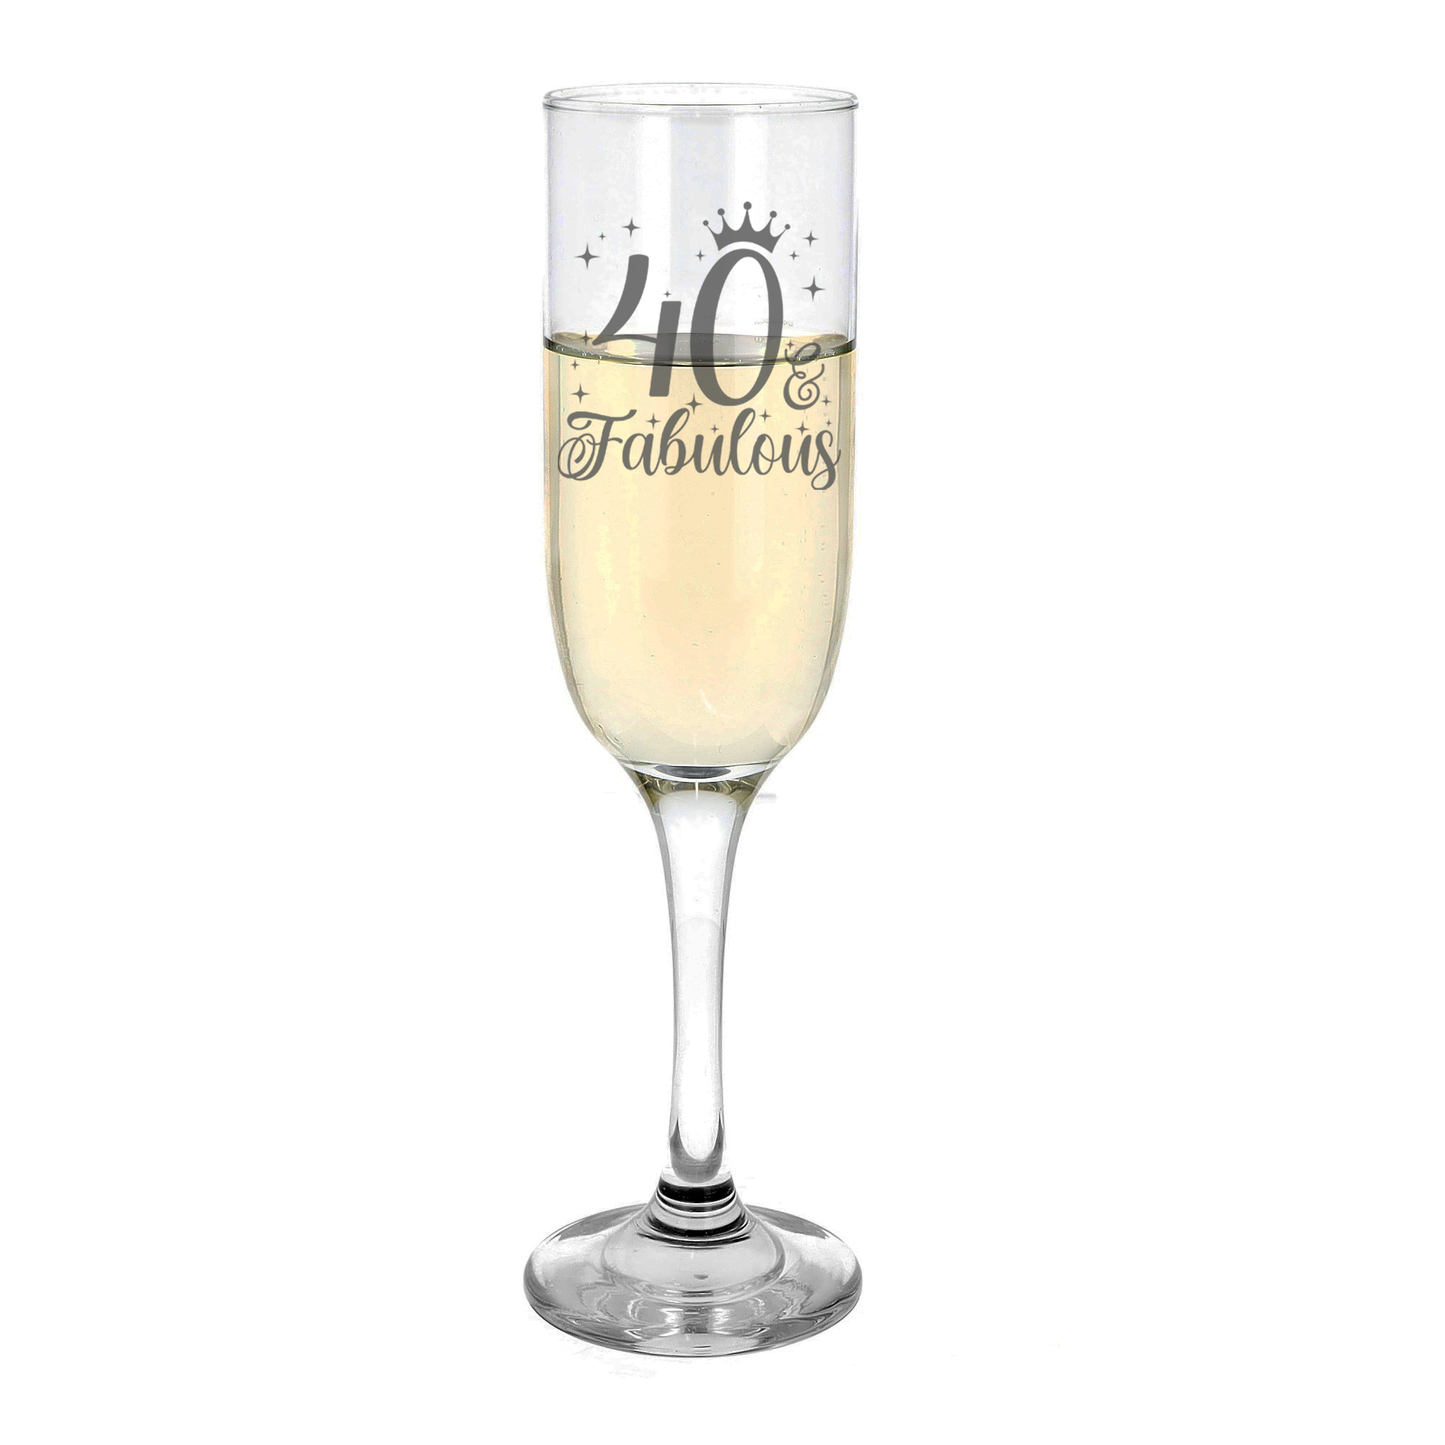 40 & Fabulous Engraved Champagne Glass and/or Coaster Set  - Always Looking Good -   